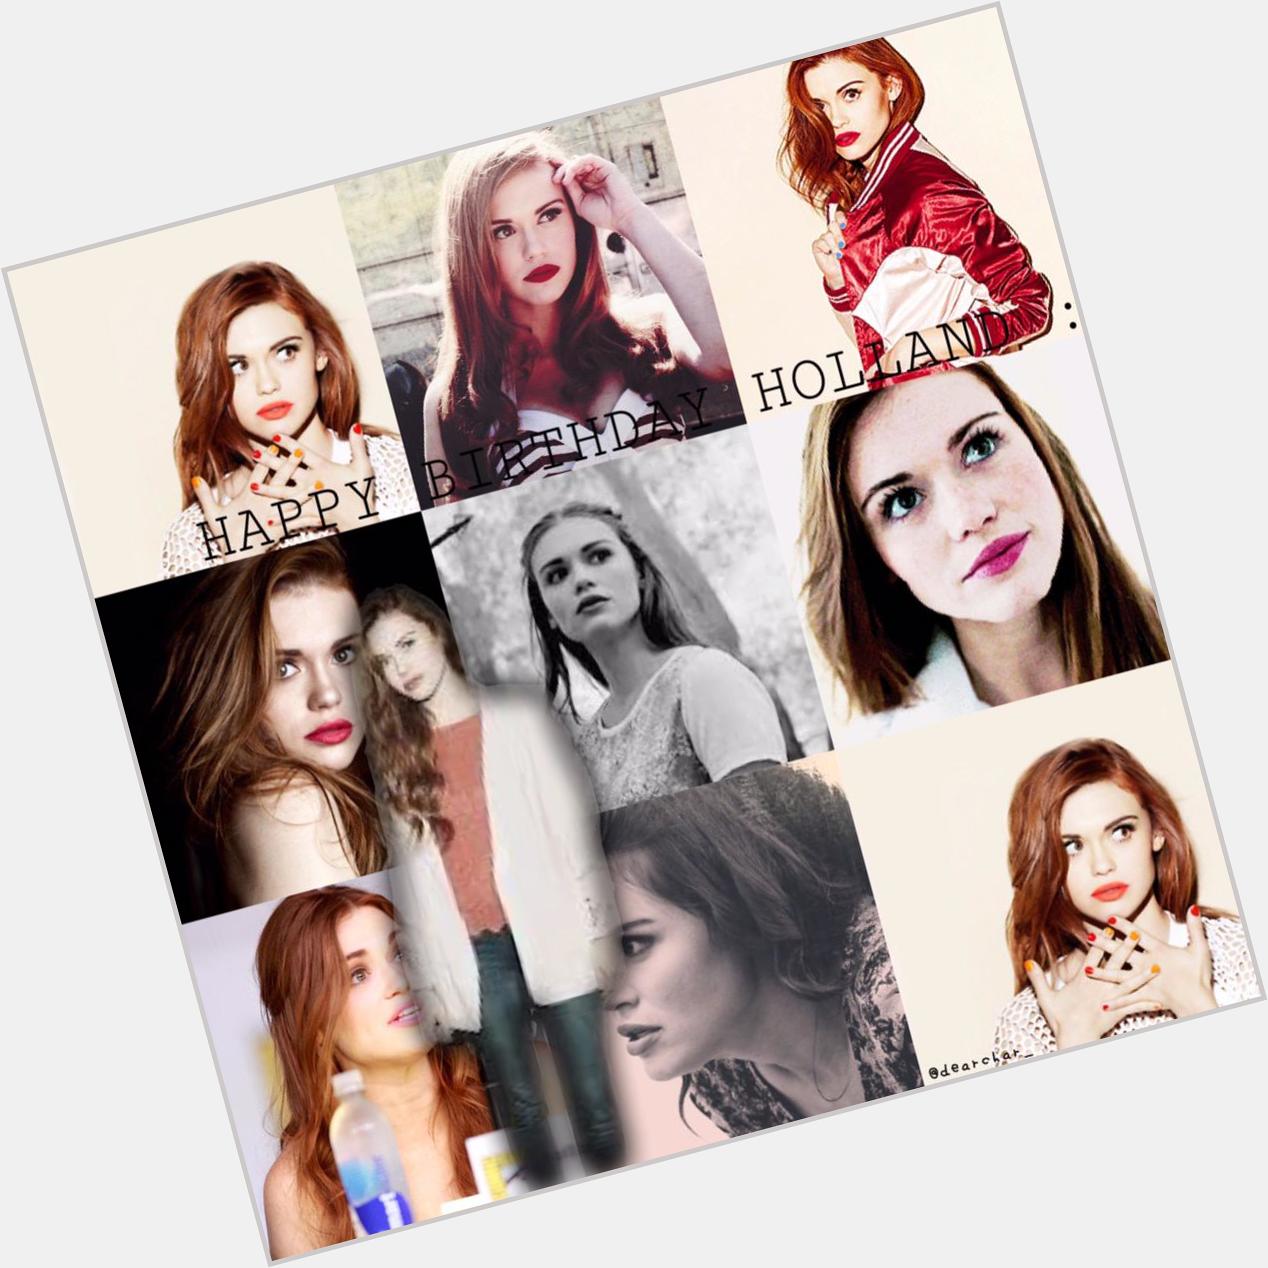 Happy birthday to the lydia martin of teen wolf. HOLLAND RODEN! slayin\ like a banshee since \86    